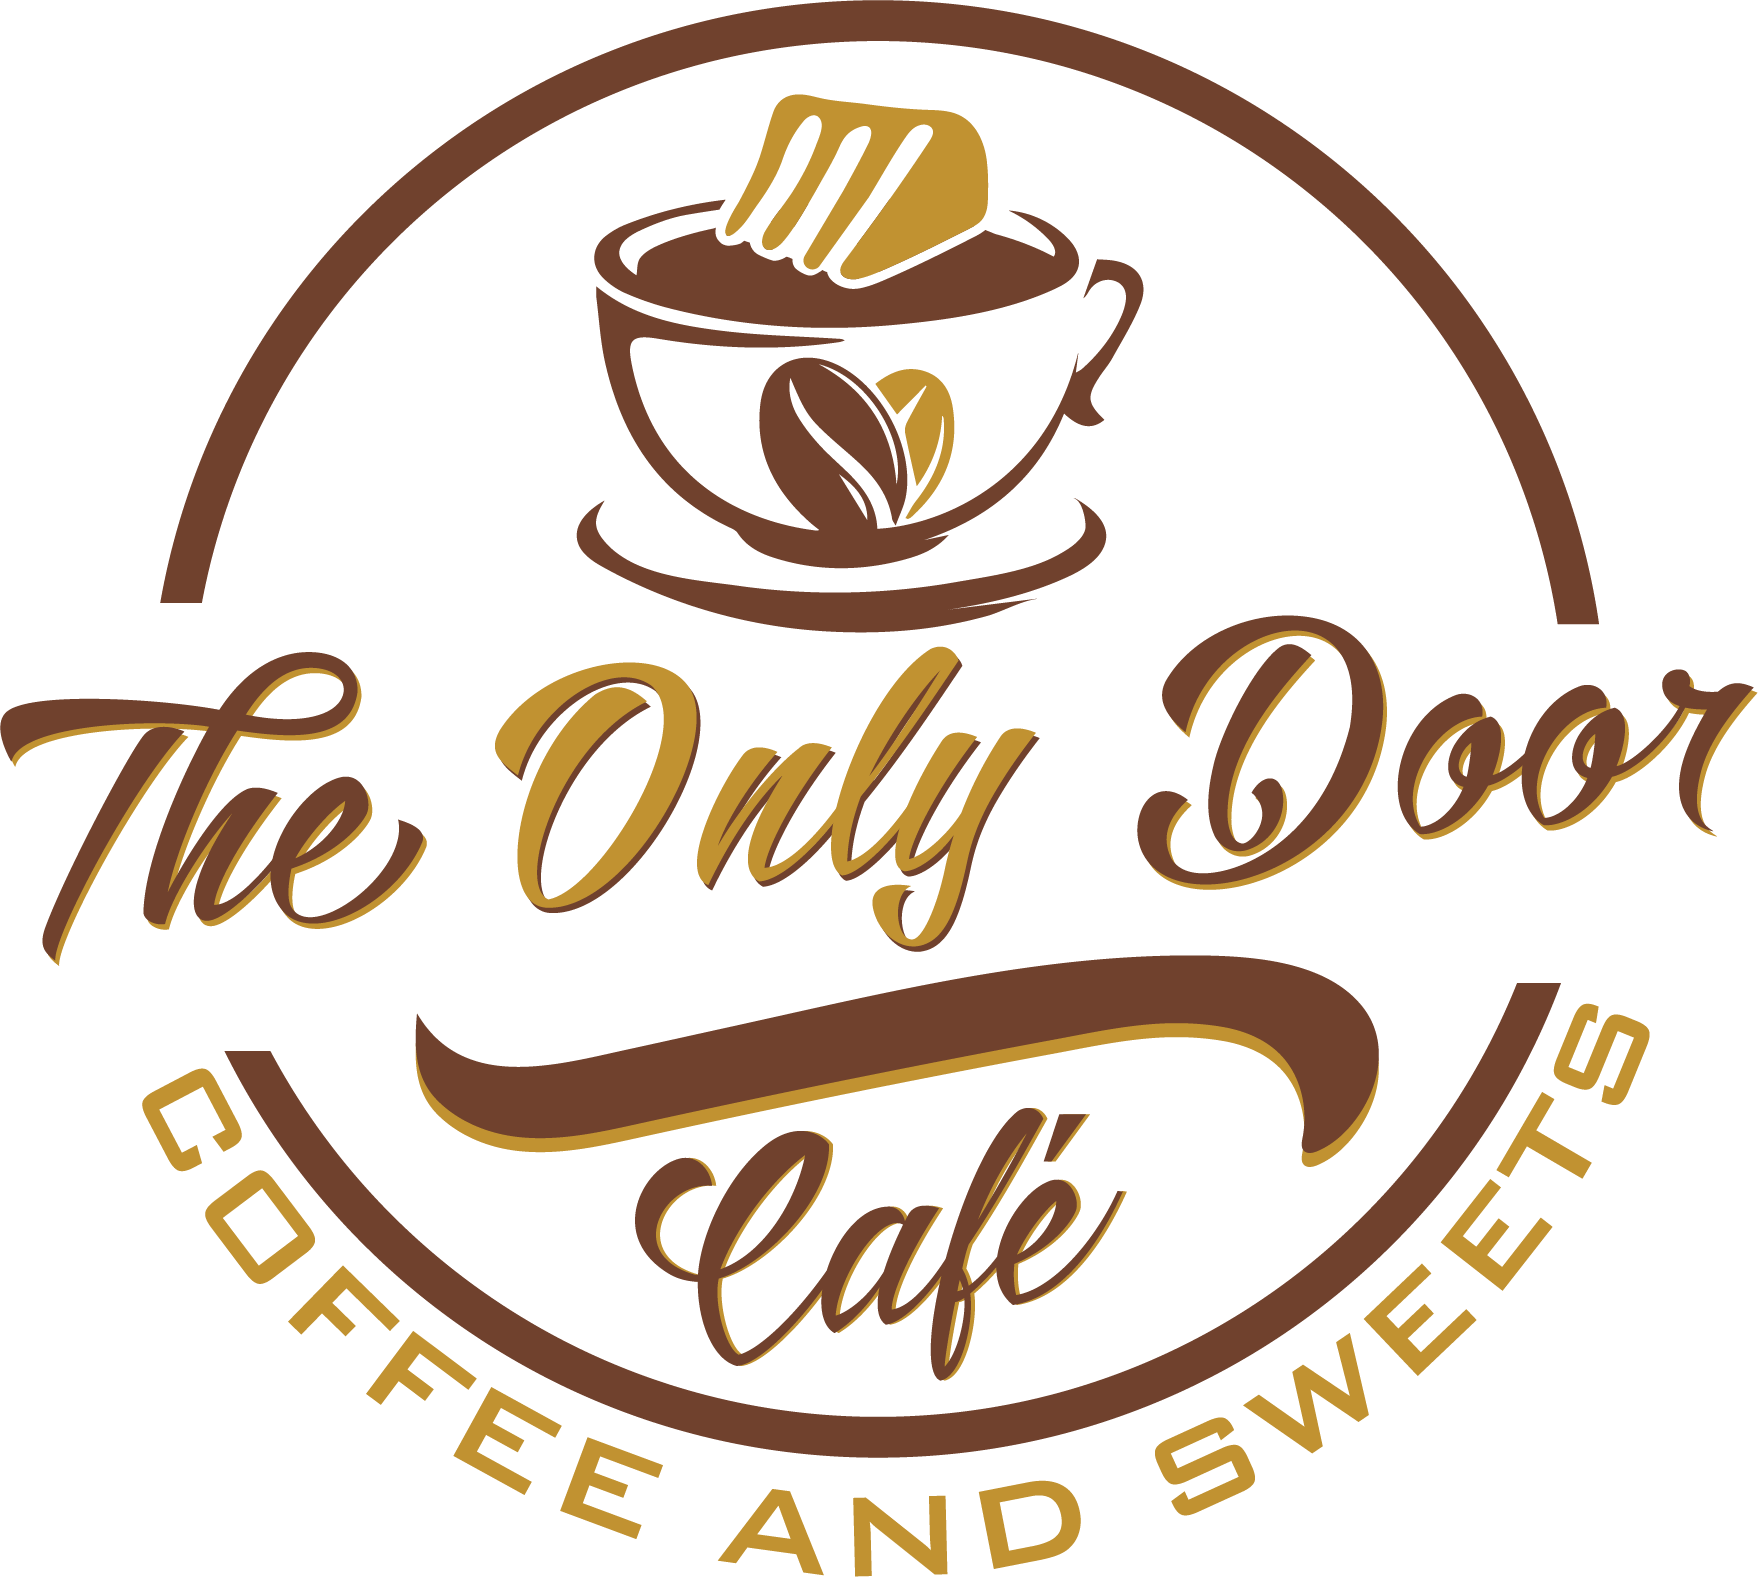 The Only Door Cafe